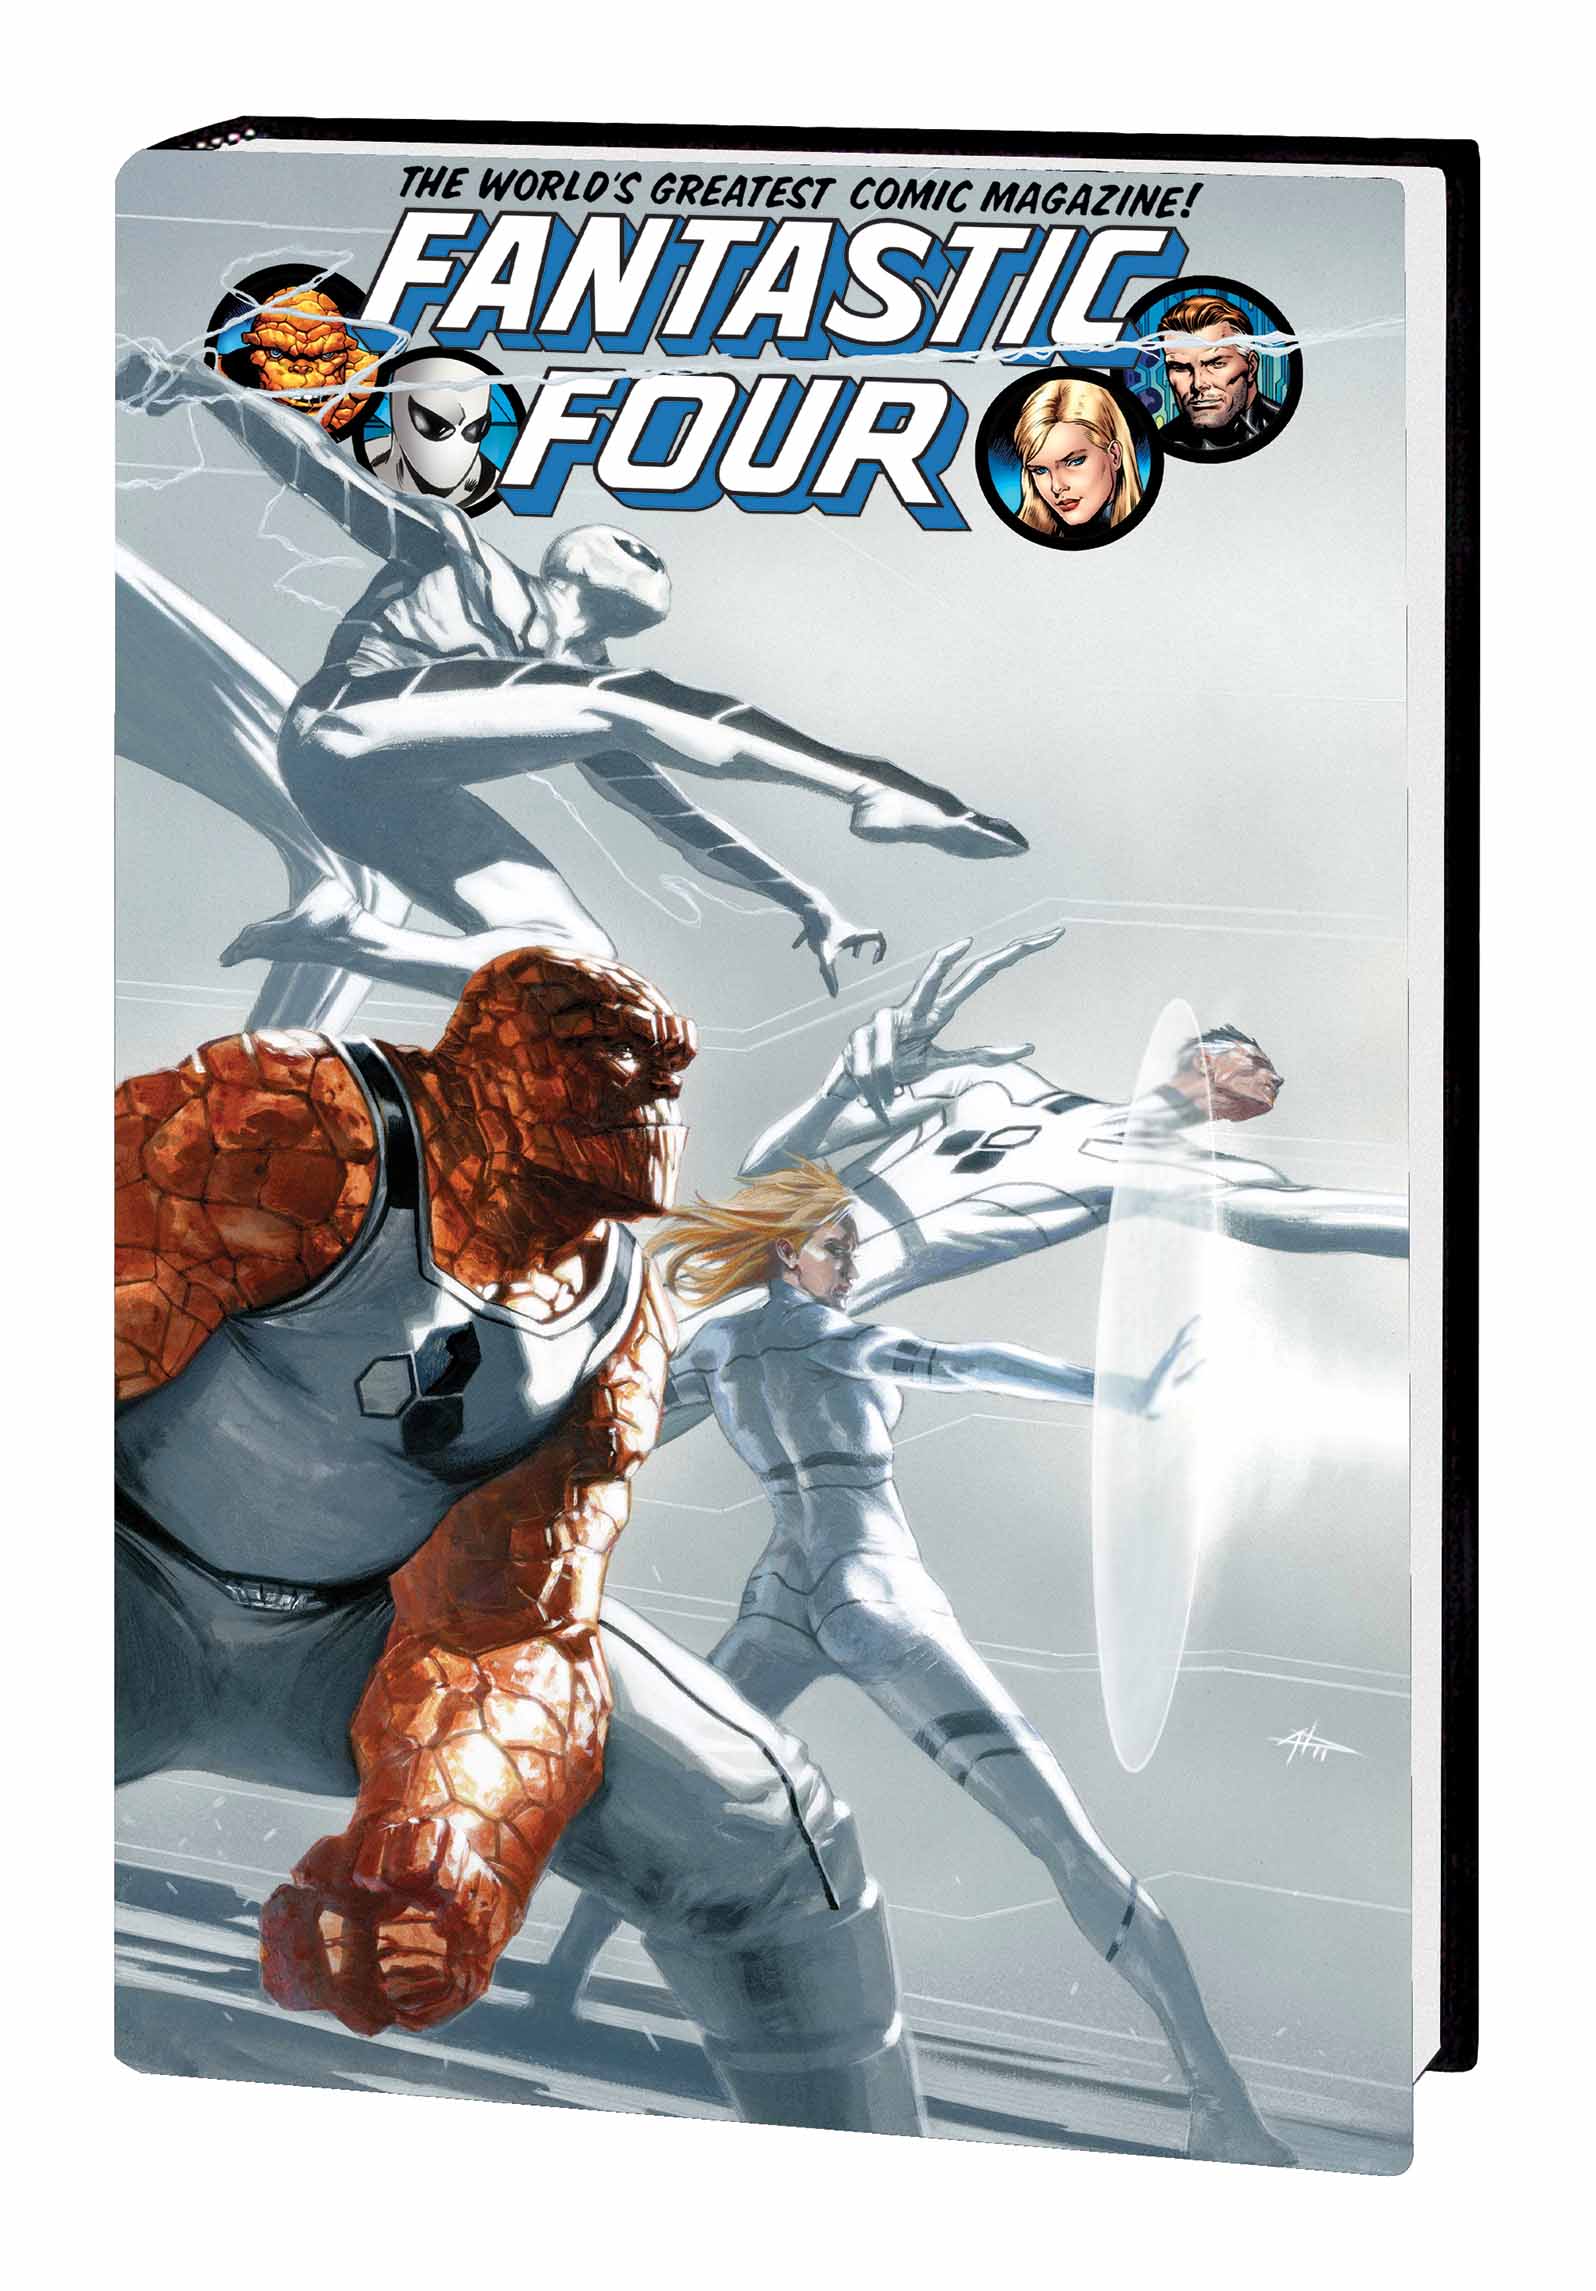 Fantastic Four by Jonathan Hickman (Hardcover)